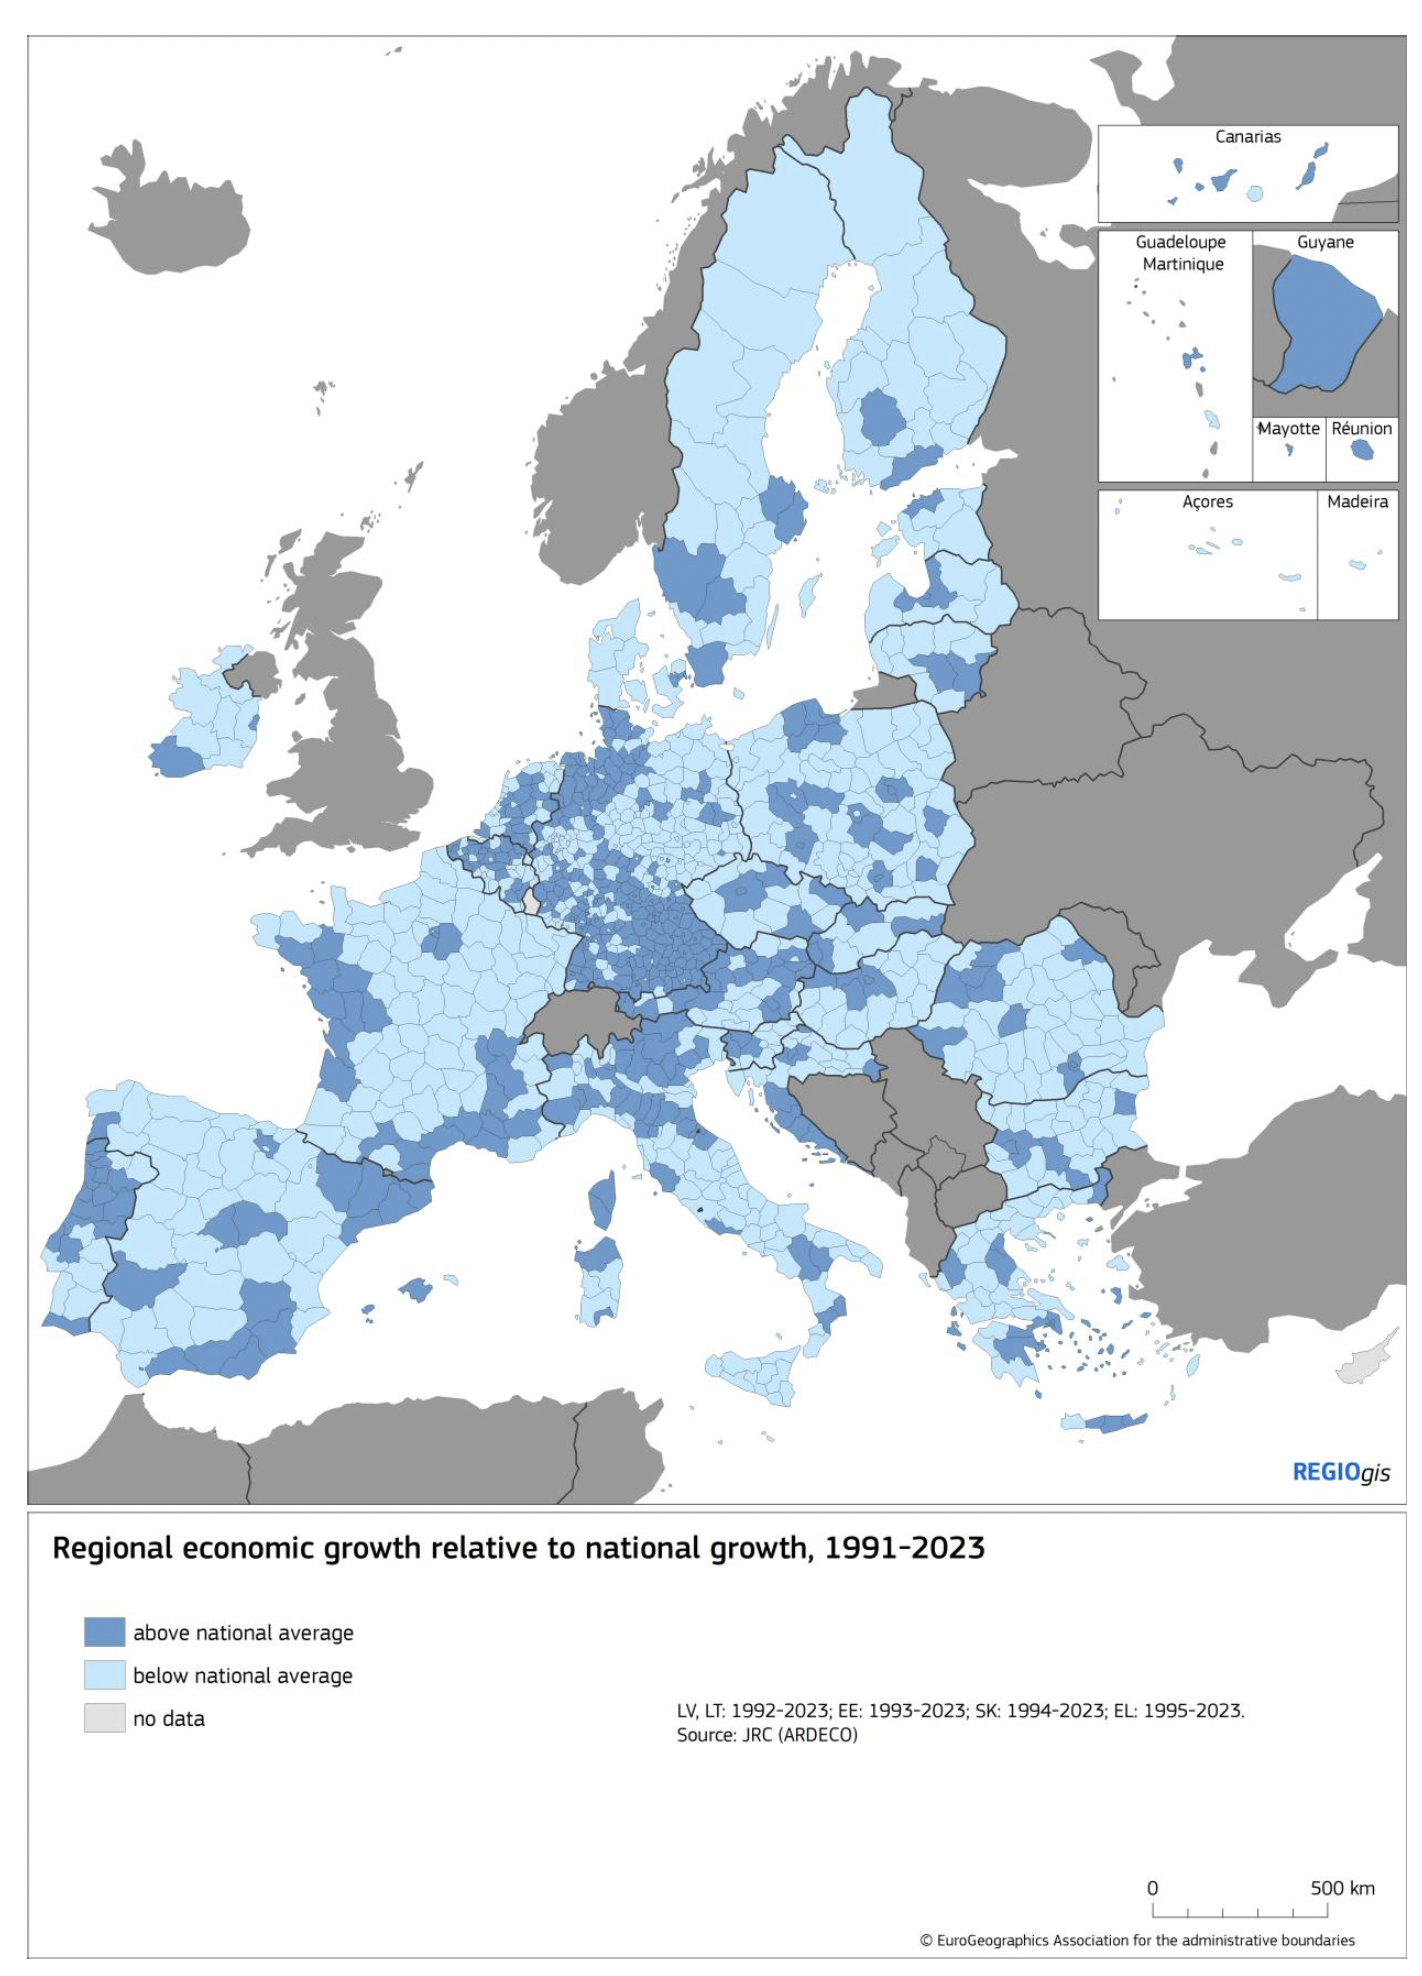 Figure 2 Regions performing above and below their national average GDP growth between 1991 and 2023